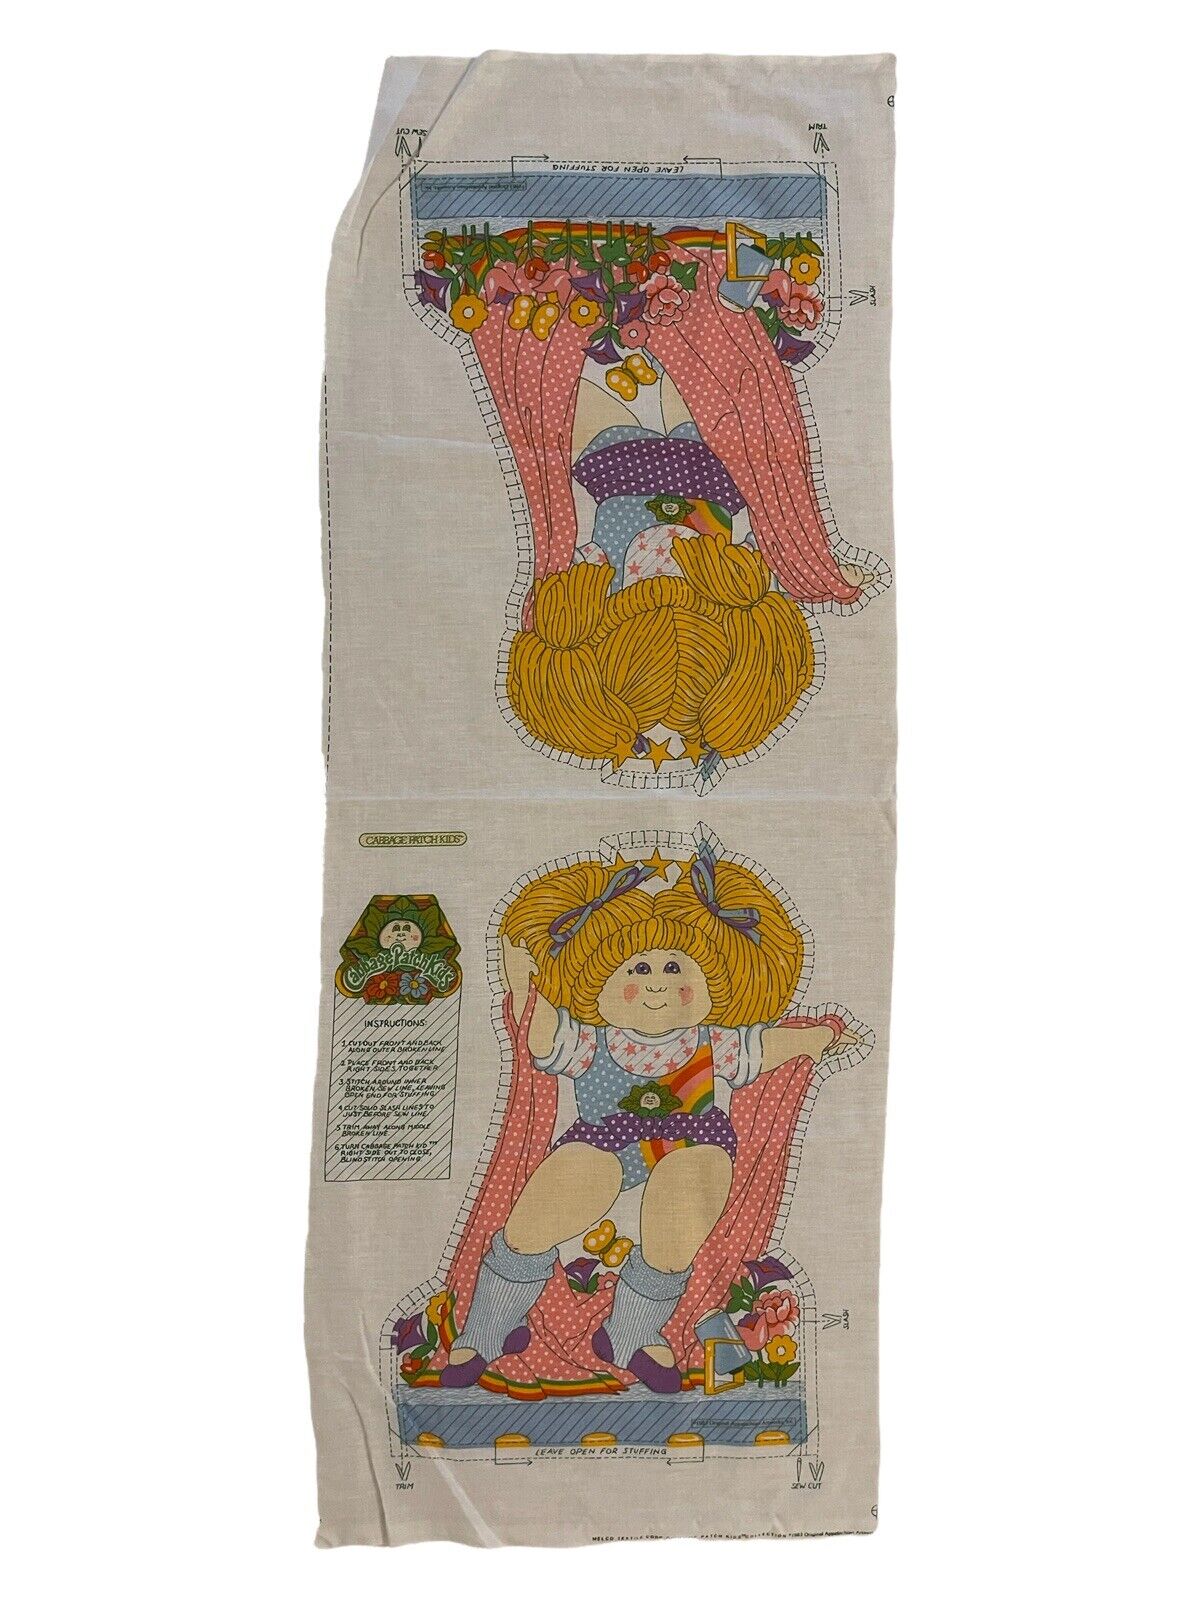 1983 Cabbage Patch Kids A Star Is Born Blonde Cut & Sew Pillow Pattern Fabric